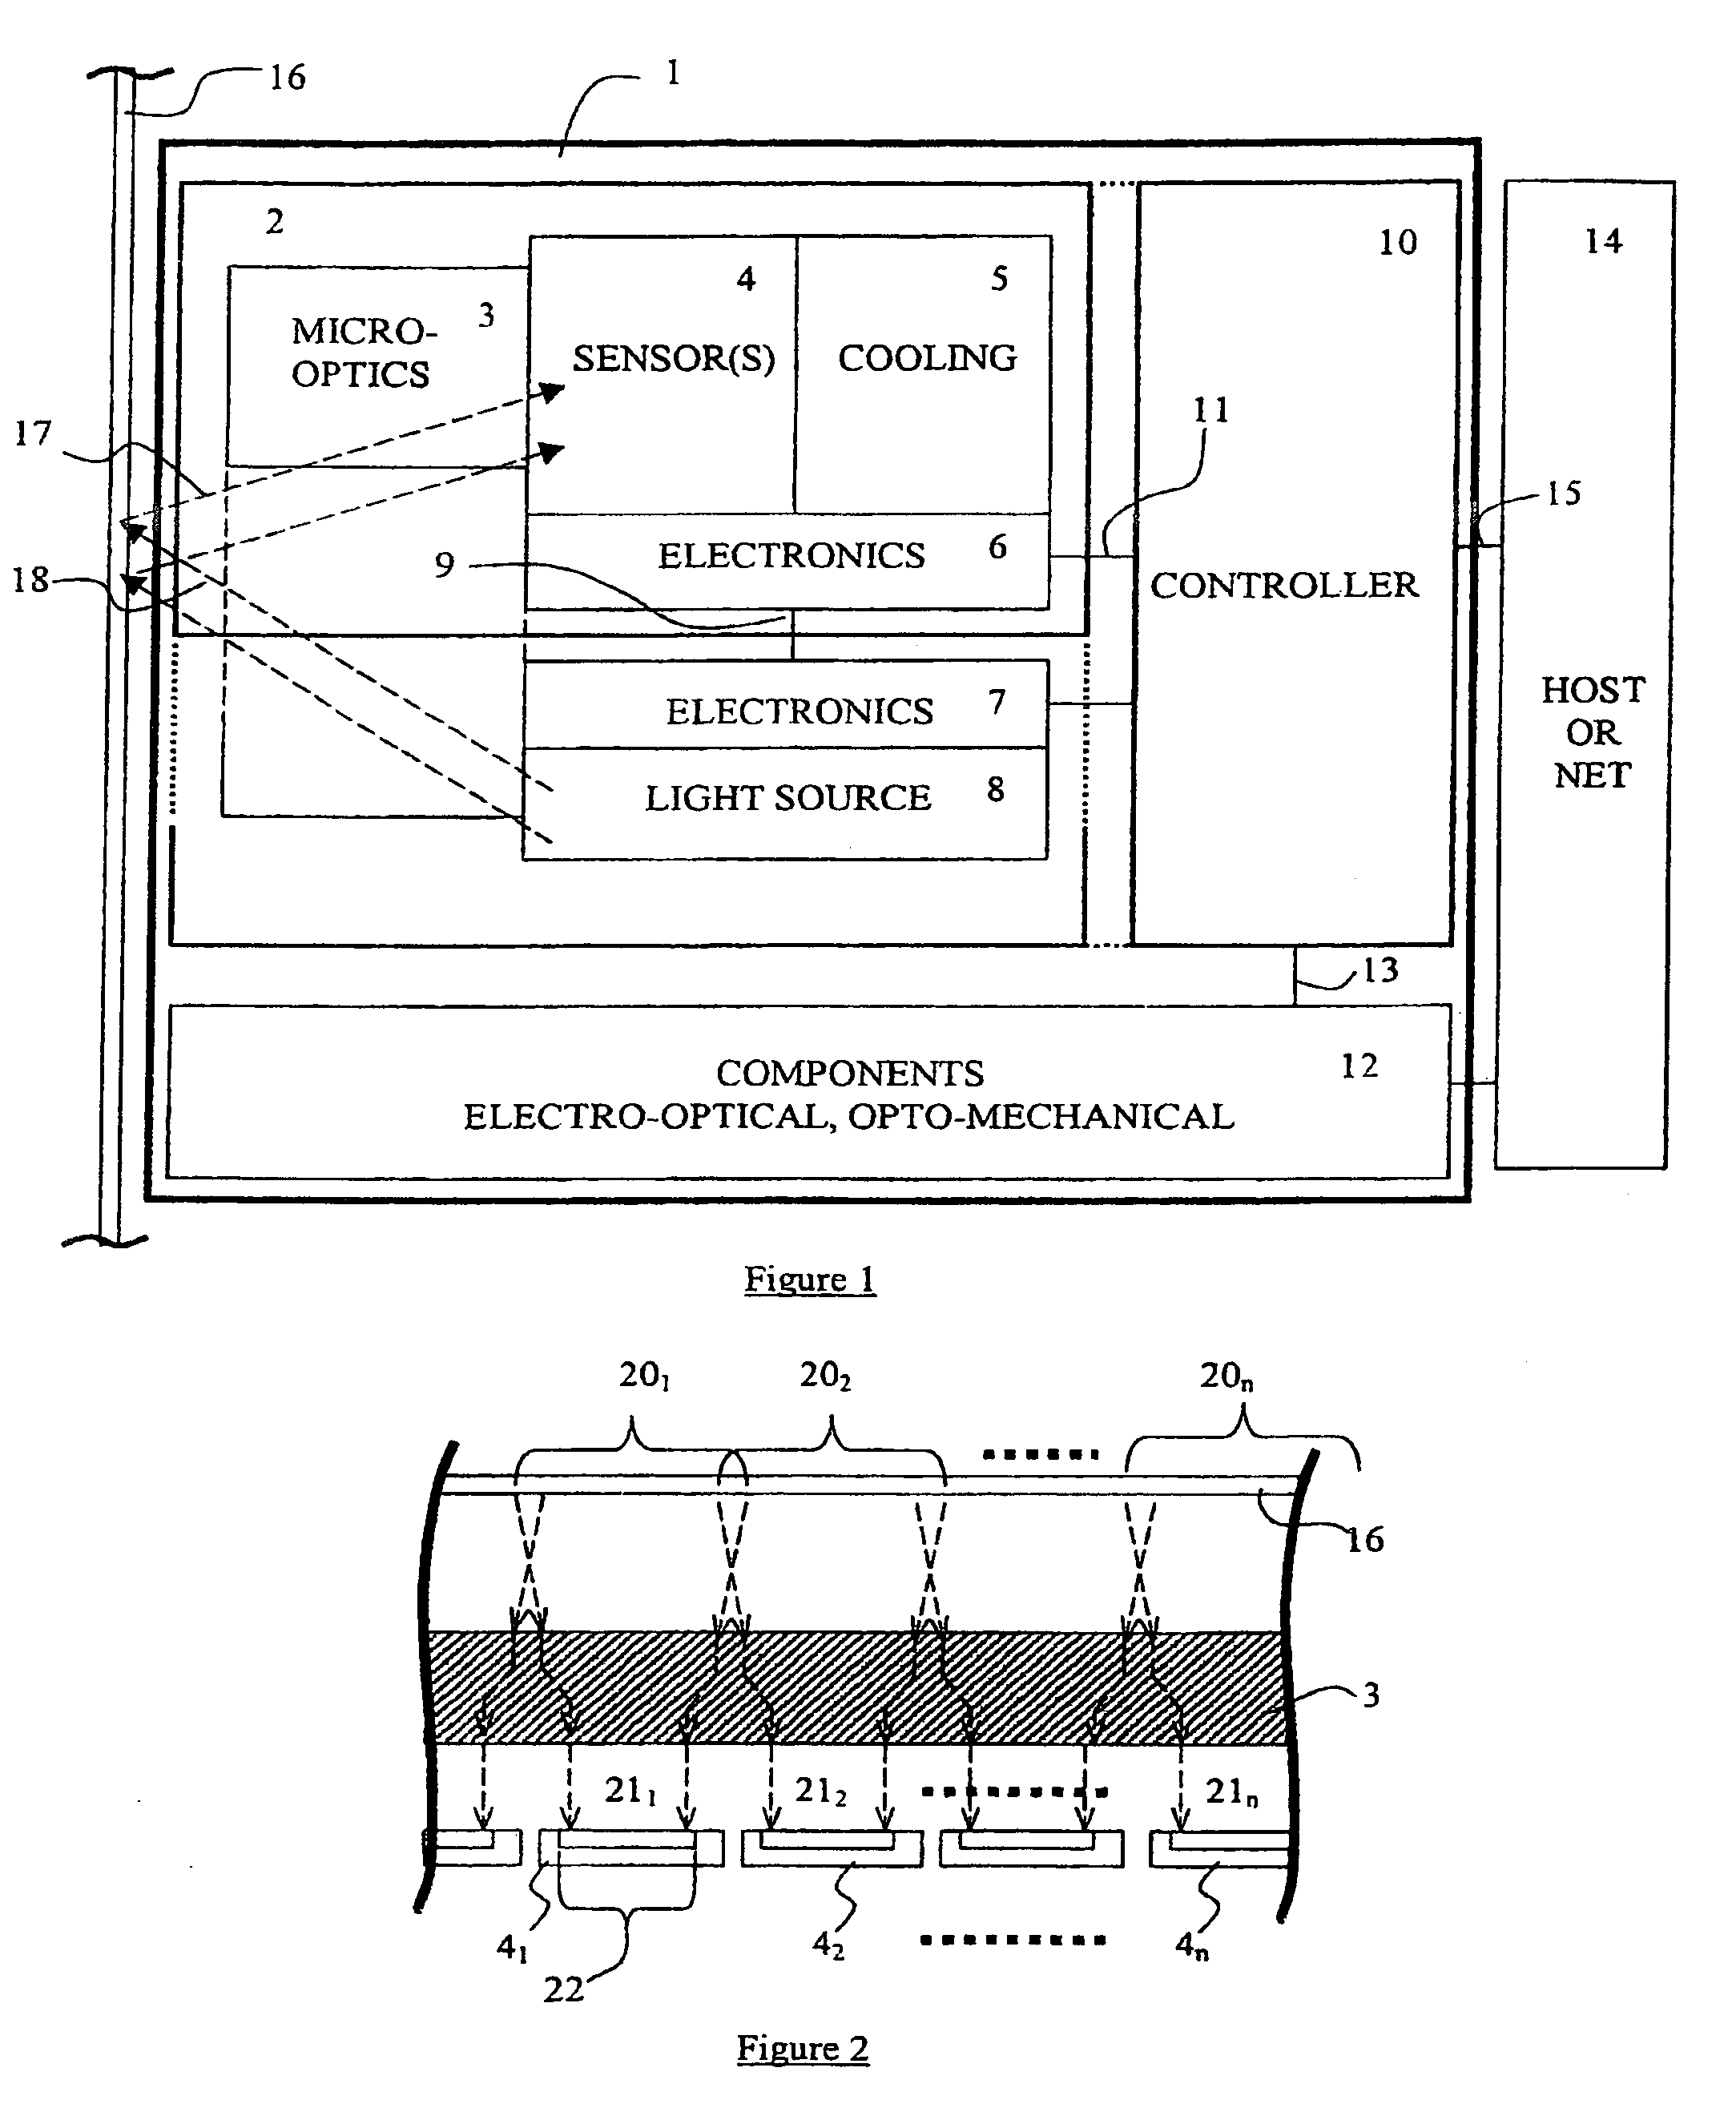 Apparatus and method for photo-electric measurement